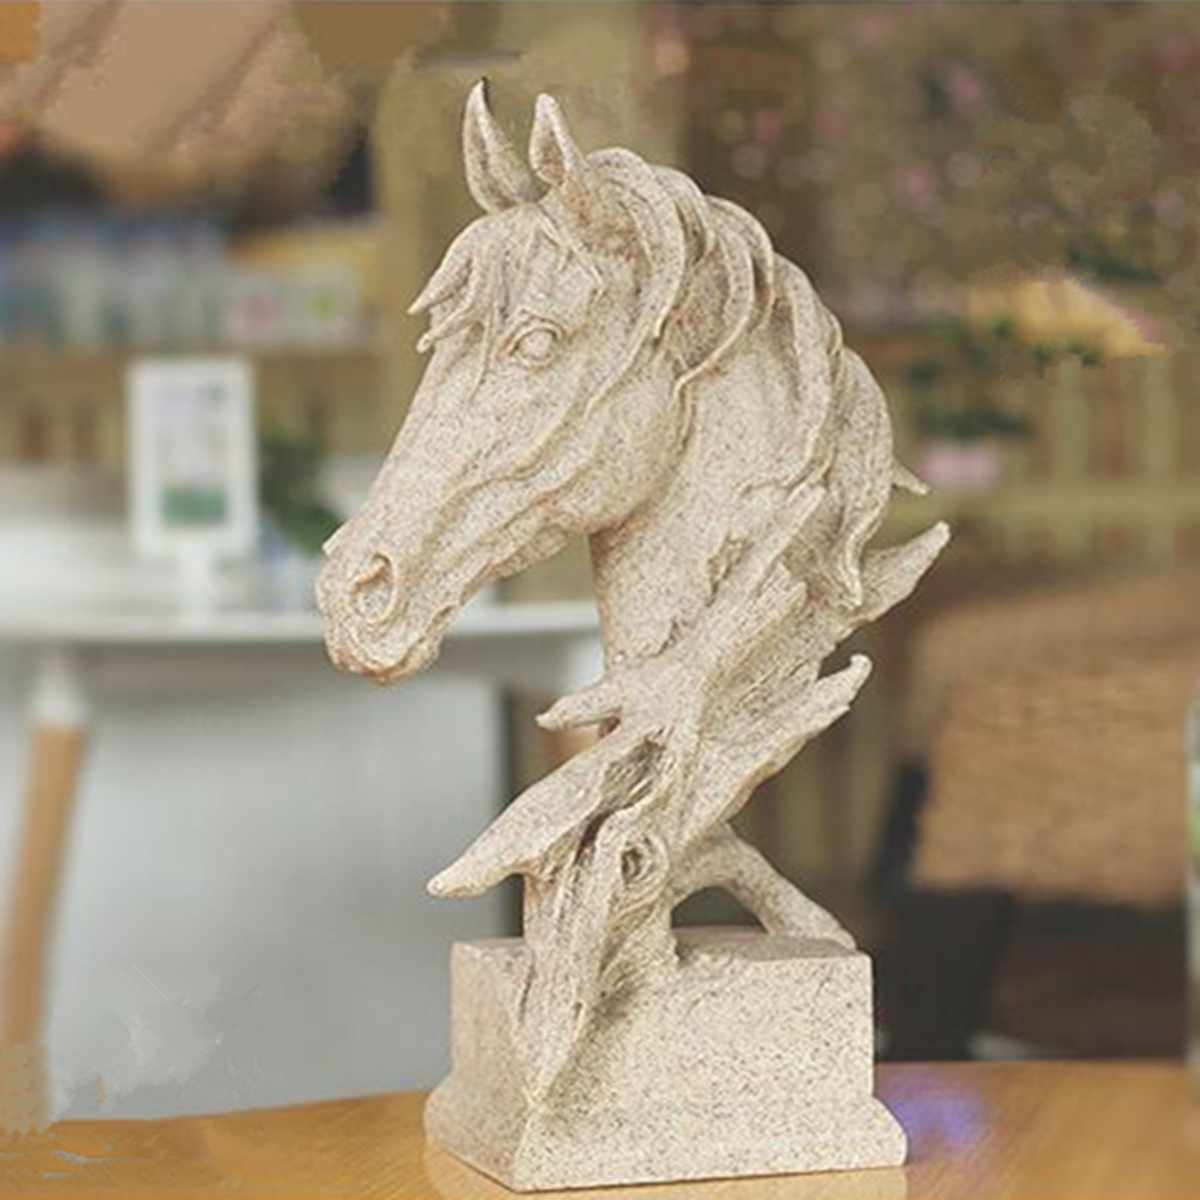 Vintage-Statue-Horse-Head-Bust-Ornament-Sculpture-Figurine-Home-Feature-Display-Decorations-1639659-2